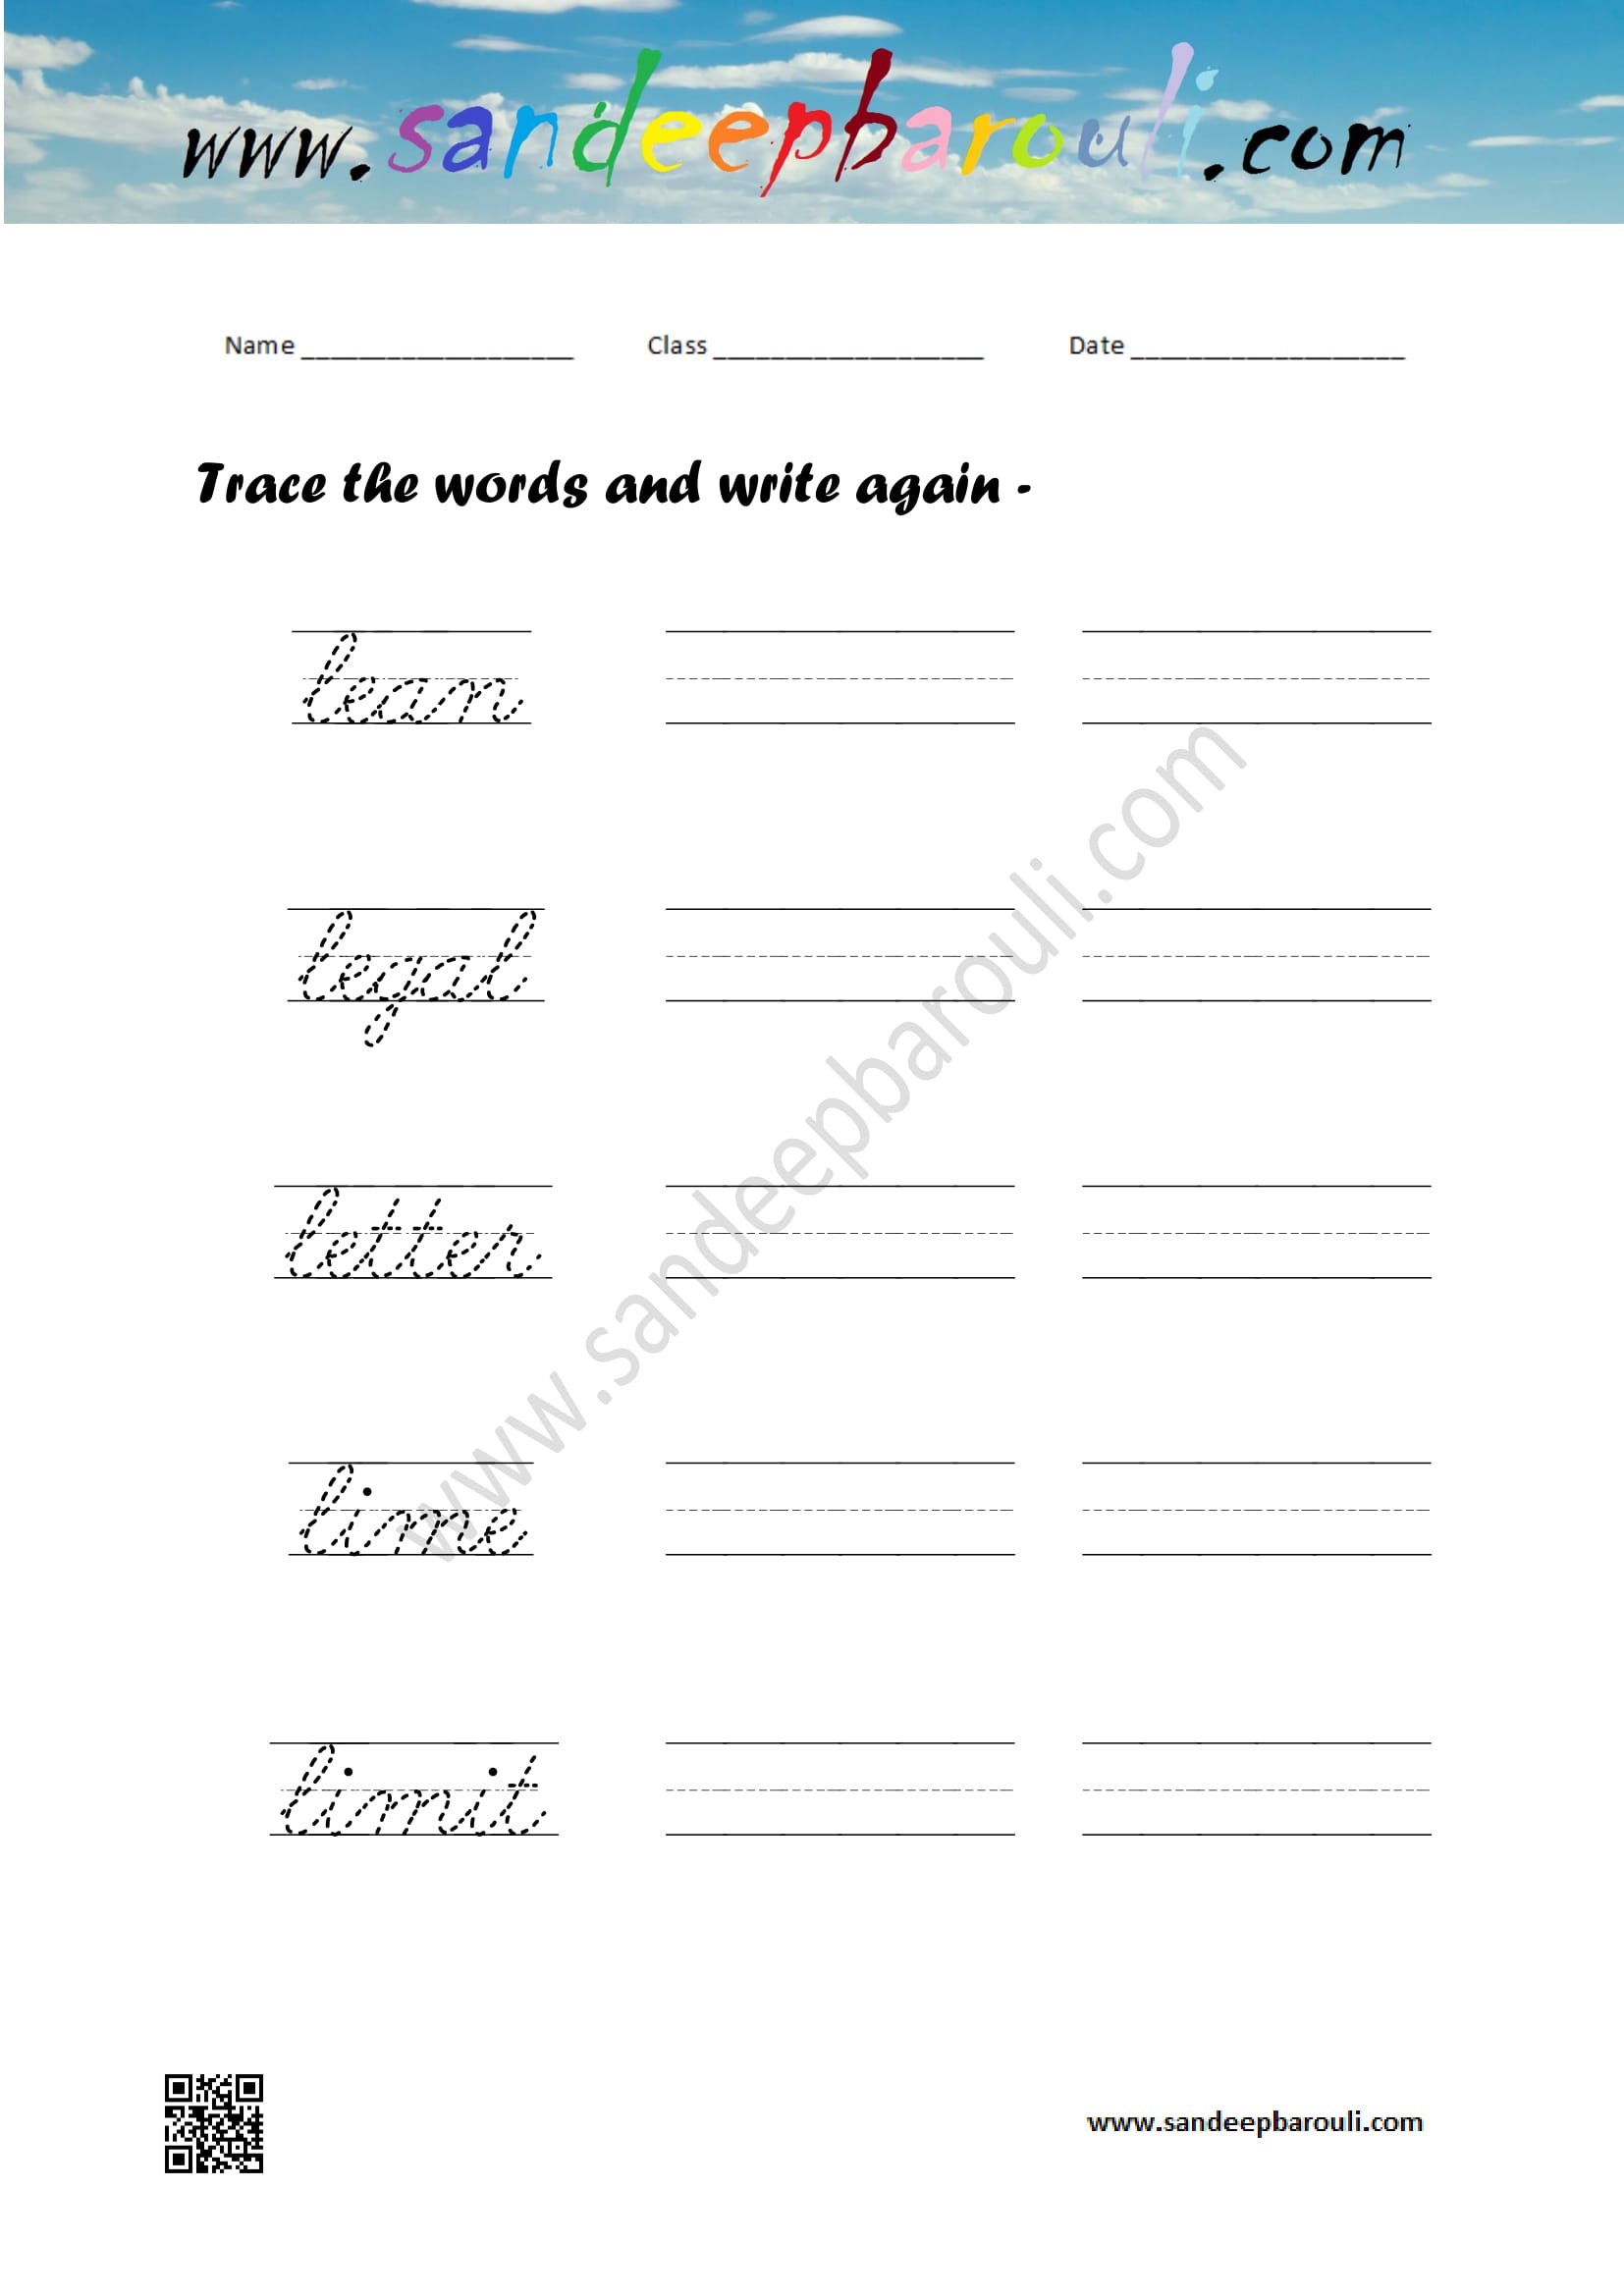 Cursive writing worksheet – trace the words and write again (48)